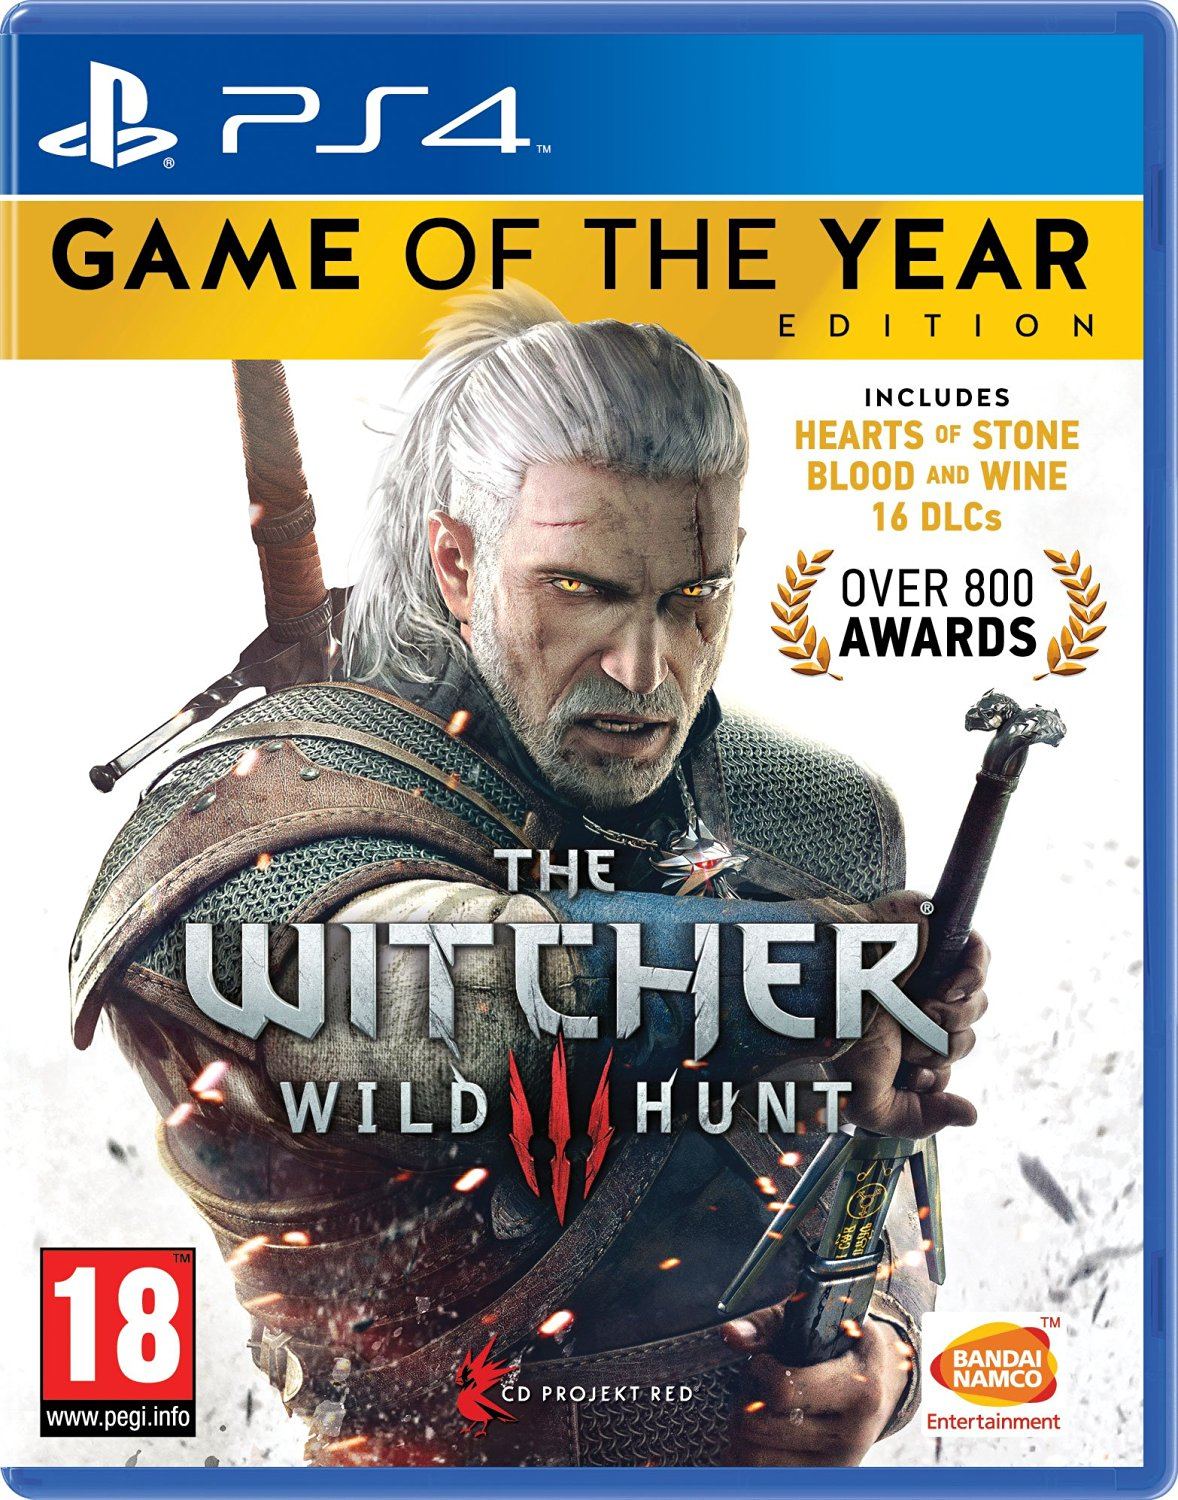 The Witcher 3: Wild Hunt [Game of the Year Edition] for PlayStation 4